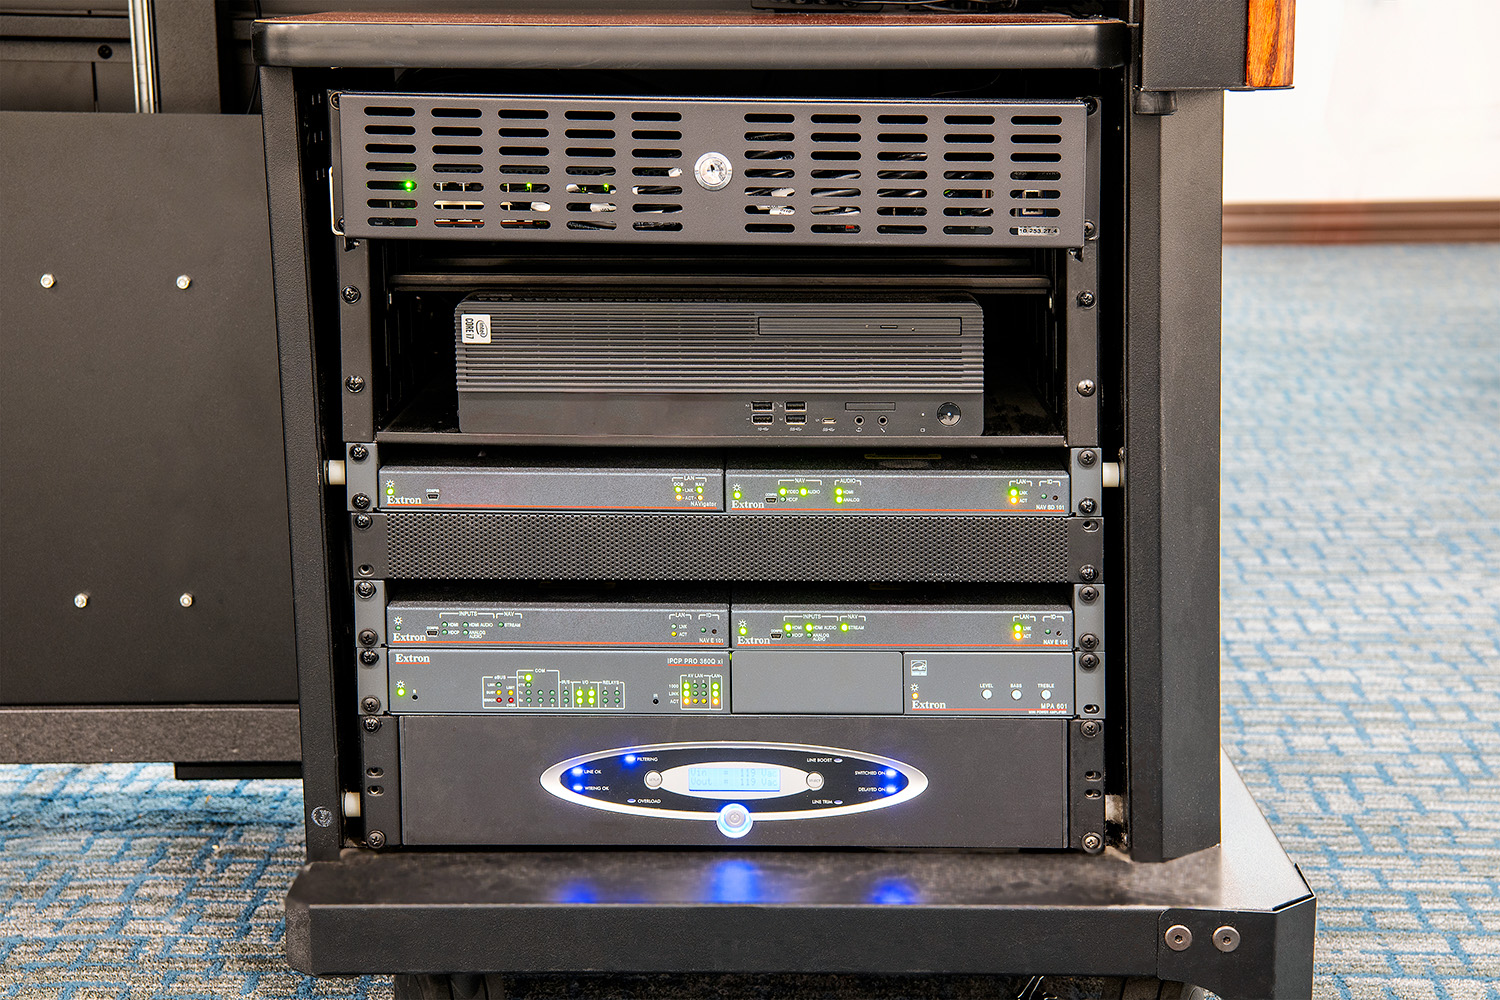 The NAV AVoIP products and other AV system components fit easily within the instructor station rack, occupying less space than the previous twisted pair AV switching system.